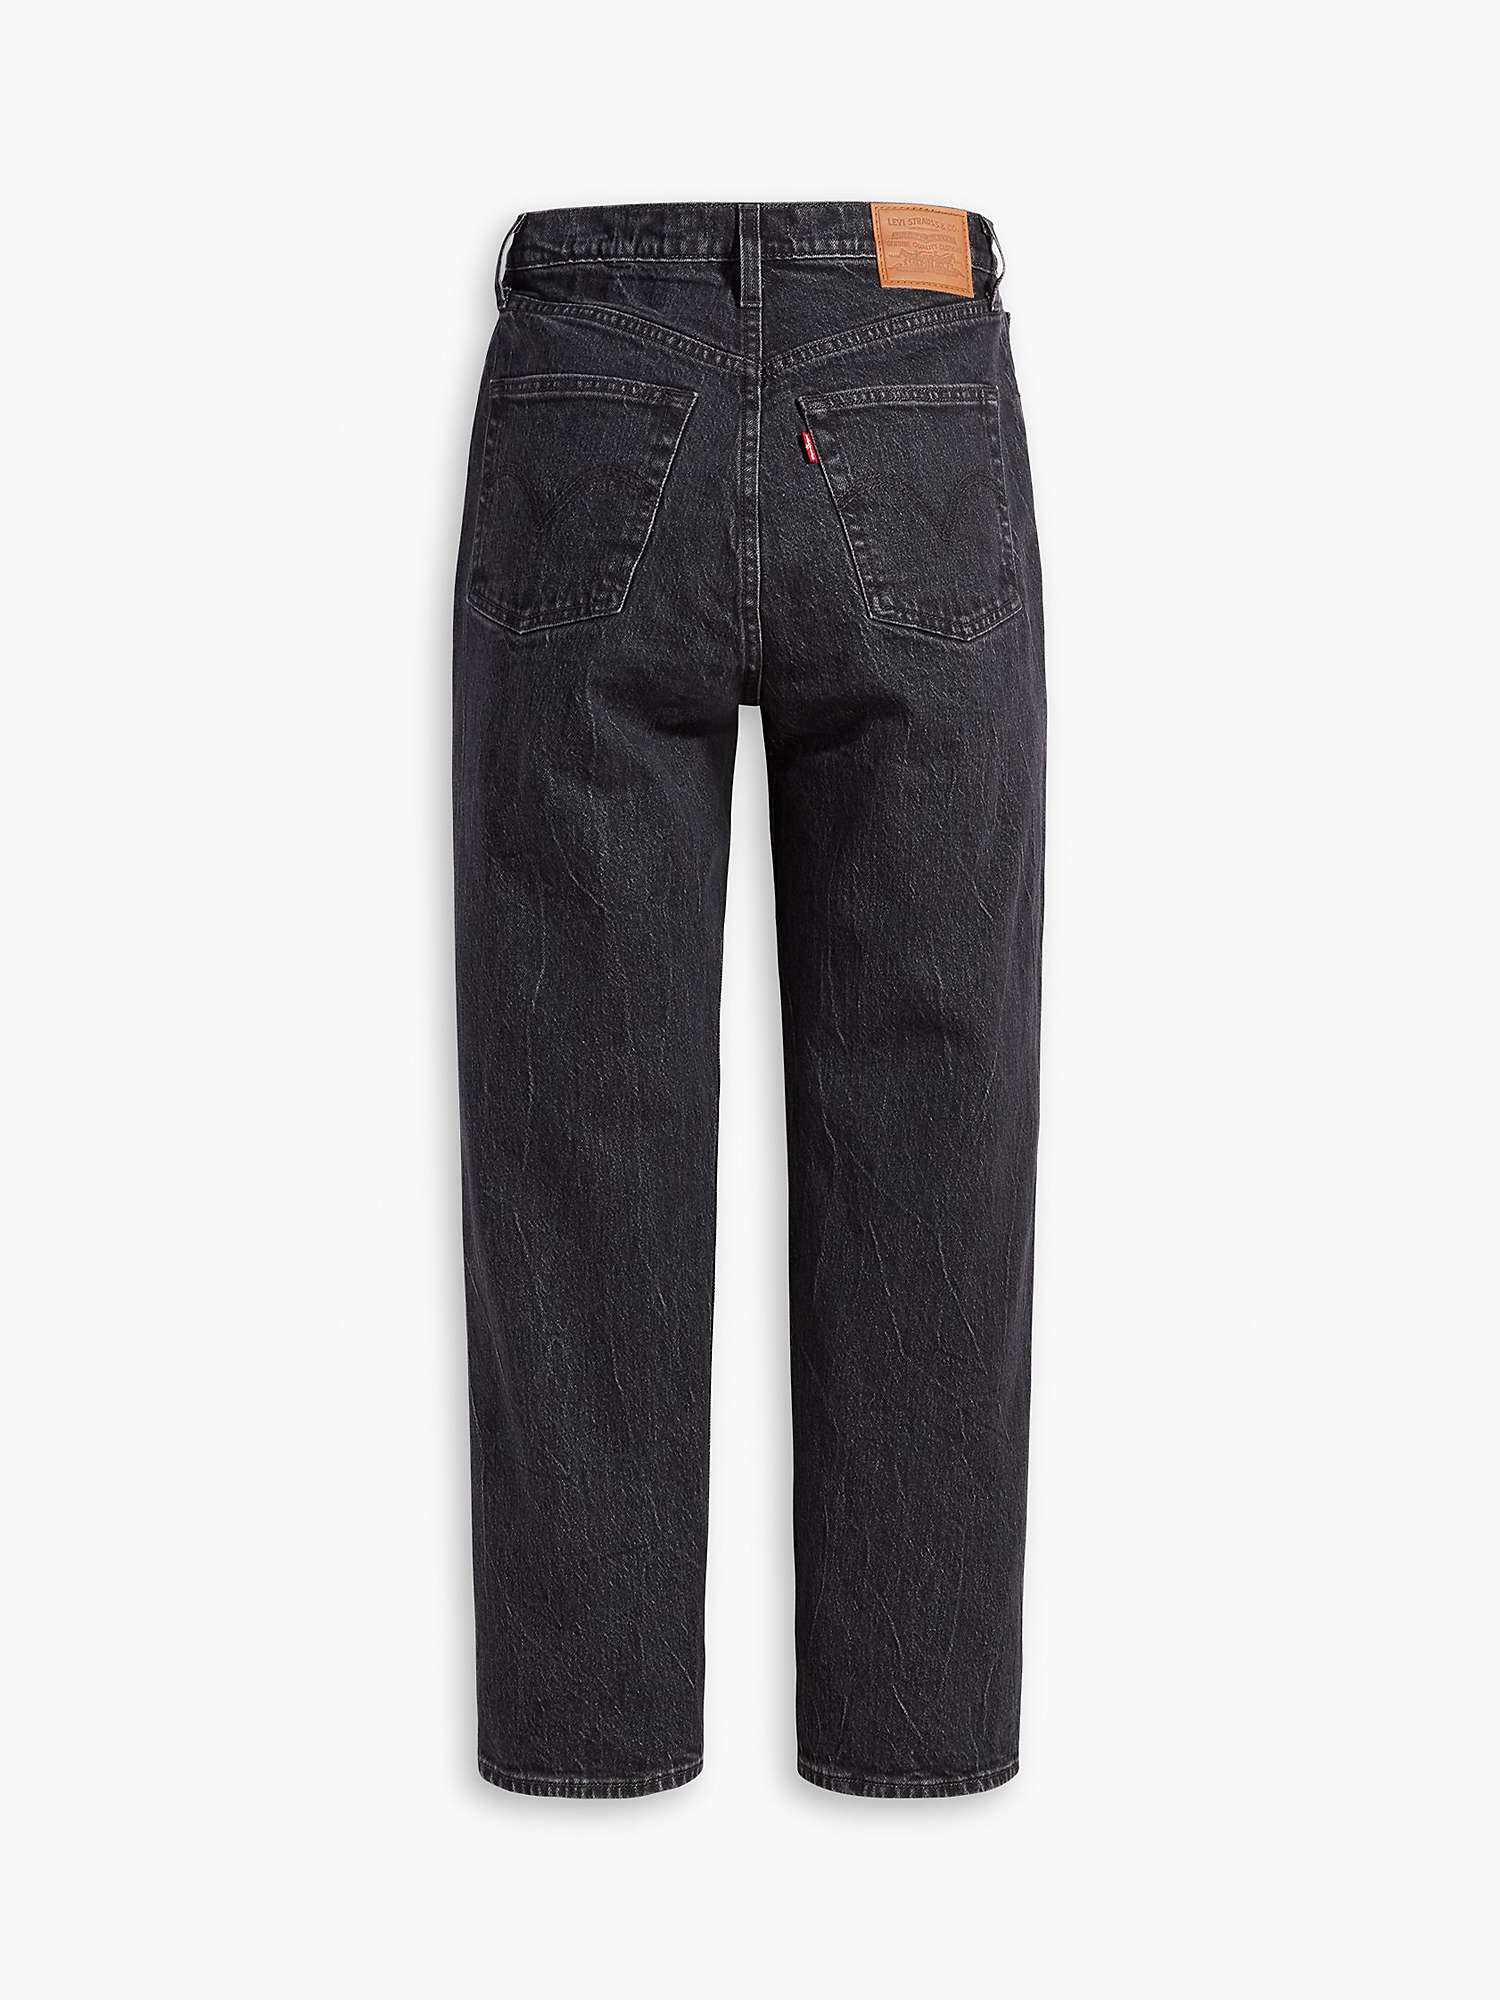 Levi's Ribcage Straight Cut Cropped Jeans, Soda Spring at John Lewis ...